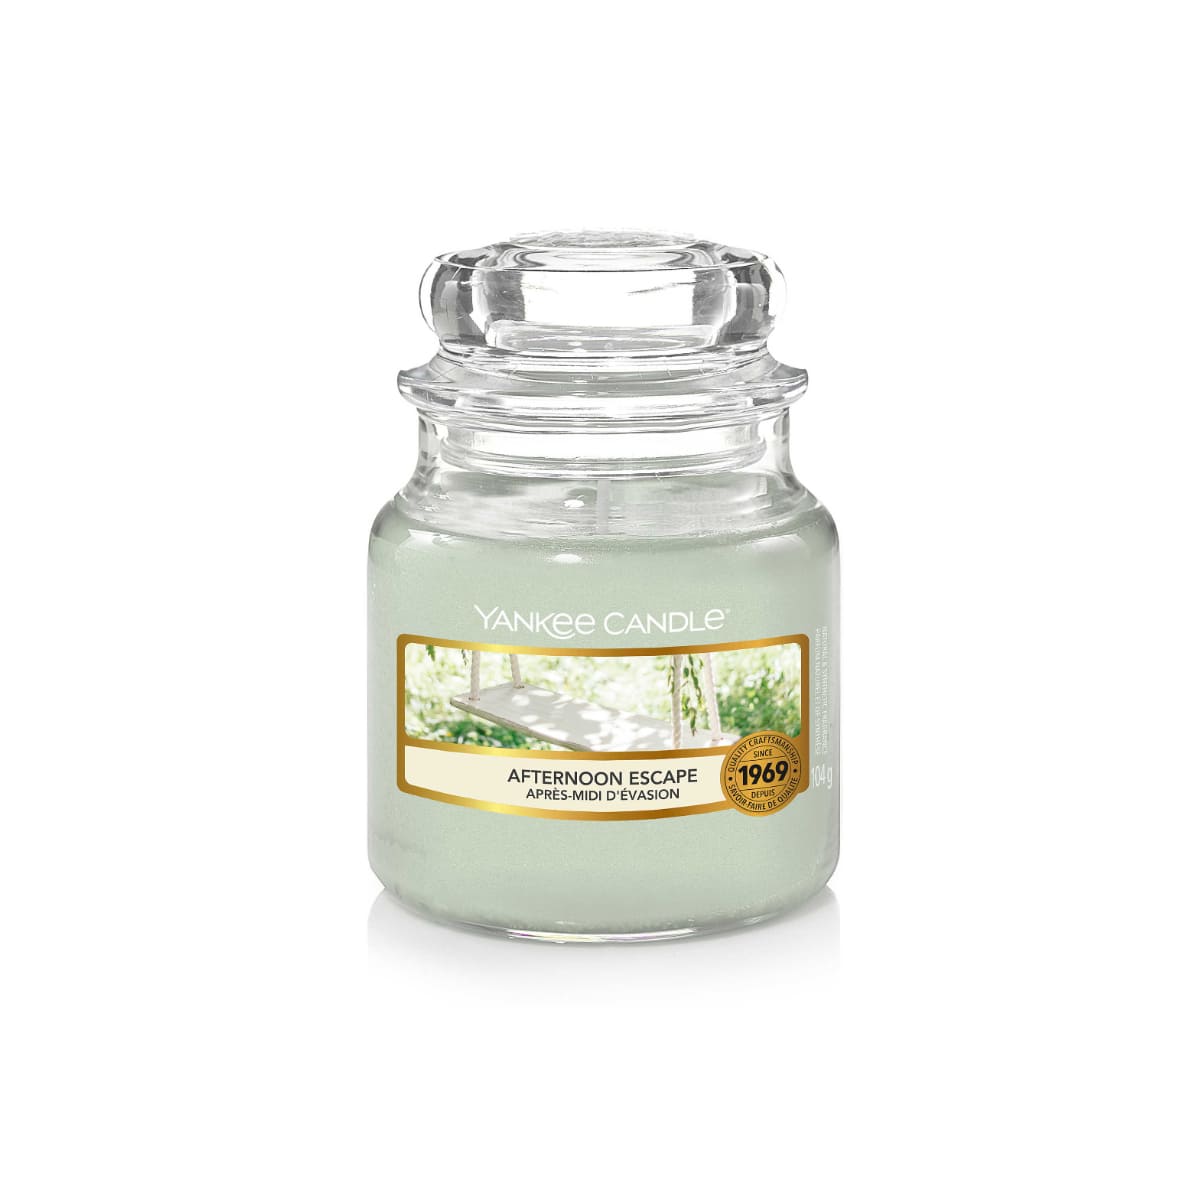 Vela Afternoon Escape Yankee Candle